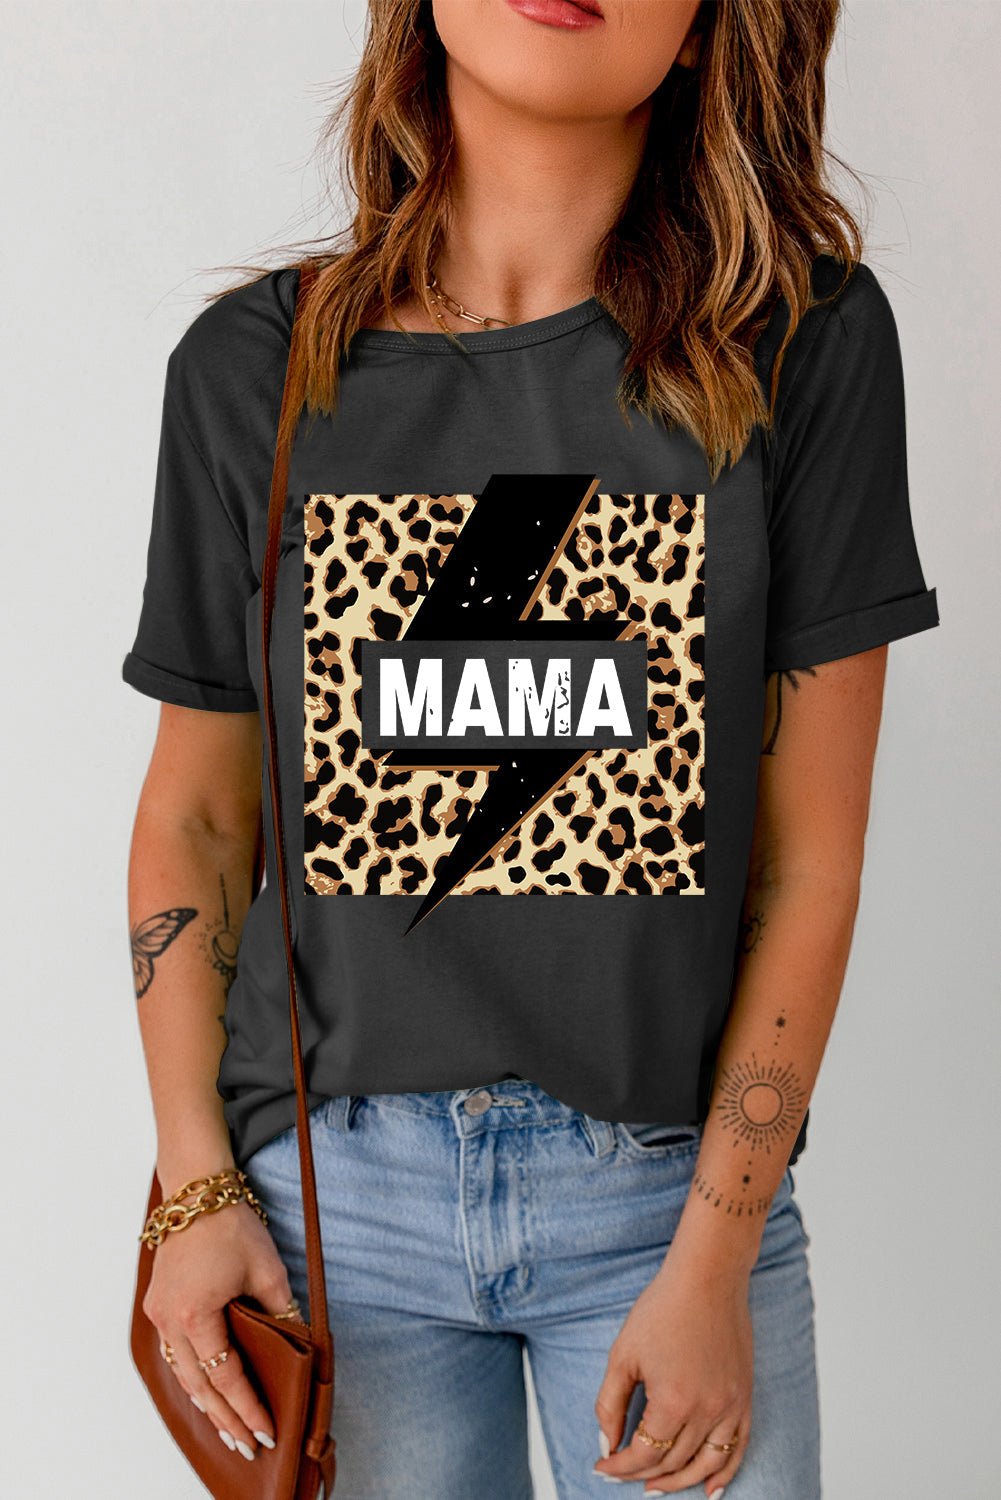 "Queen of the Jungle: Mama Leopard Lightning Graphic Tee - Revel in Untamed Beauty and Embrace your Inner Feline Strength" - Guy Christopher 